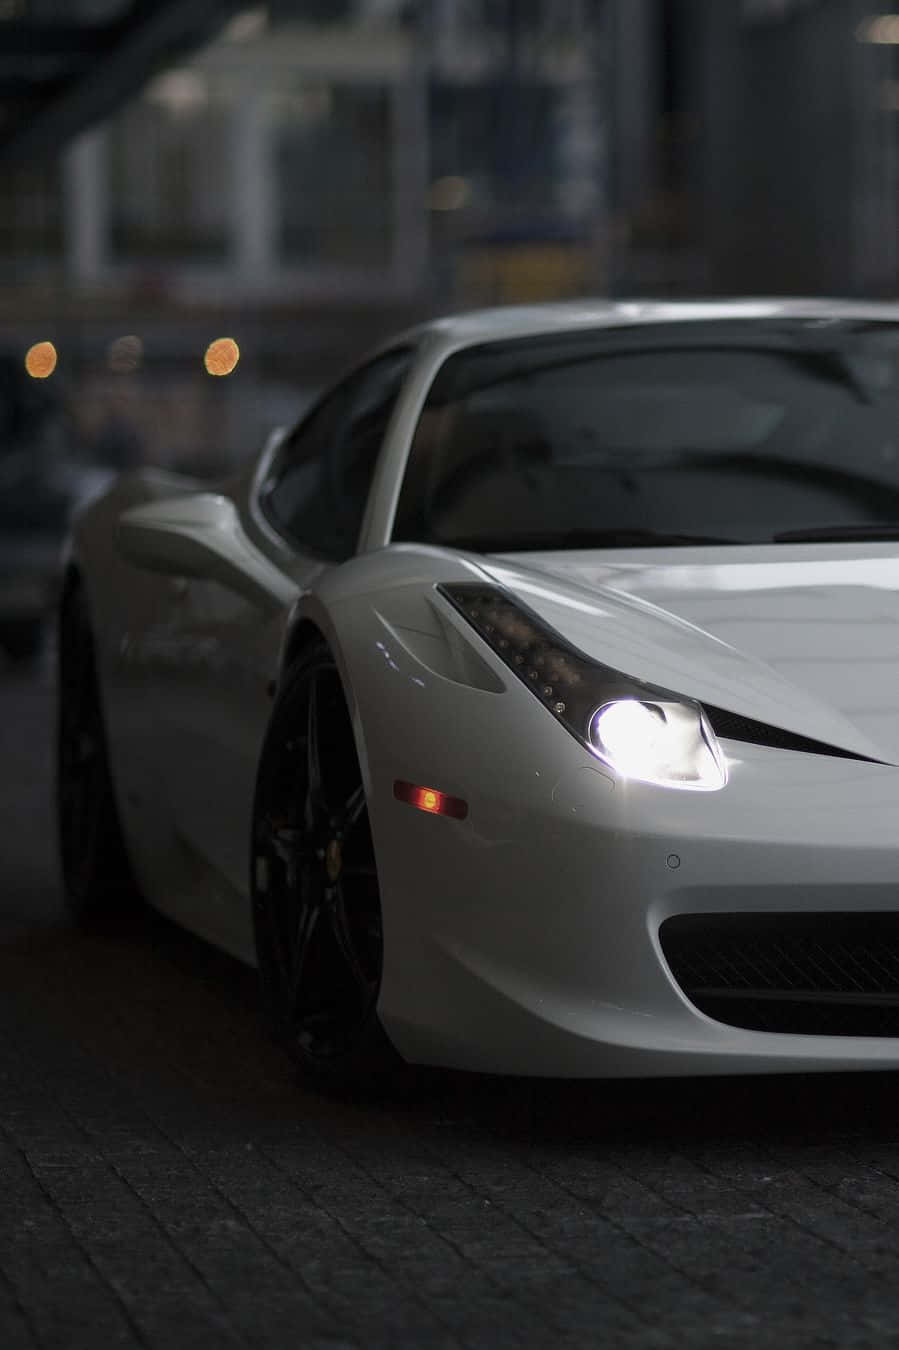 It’s Impossible to Go Wrong with a White Ferrari iPhone Wallpaper